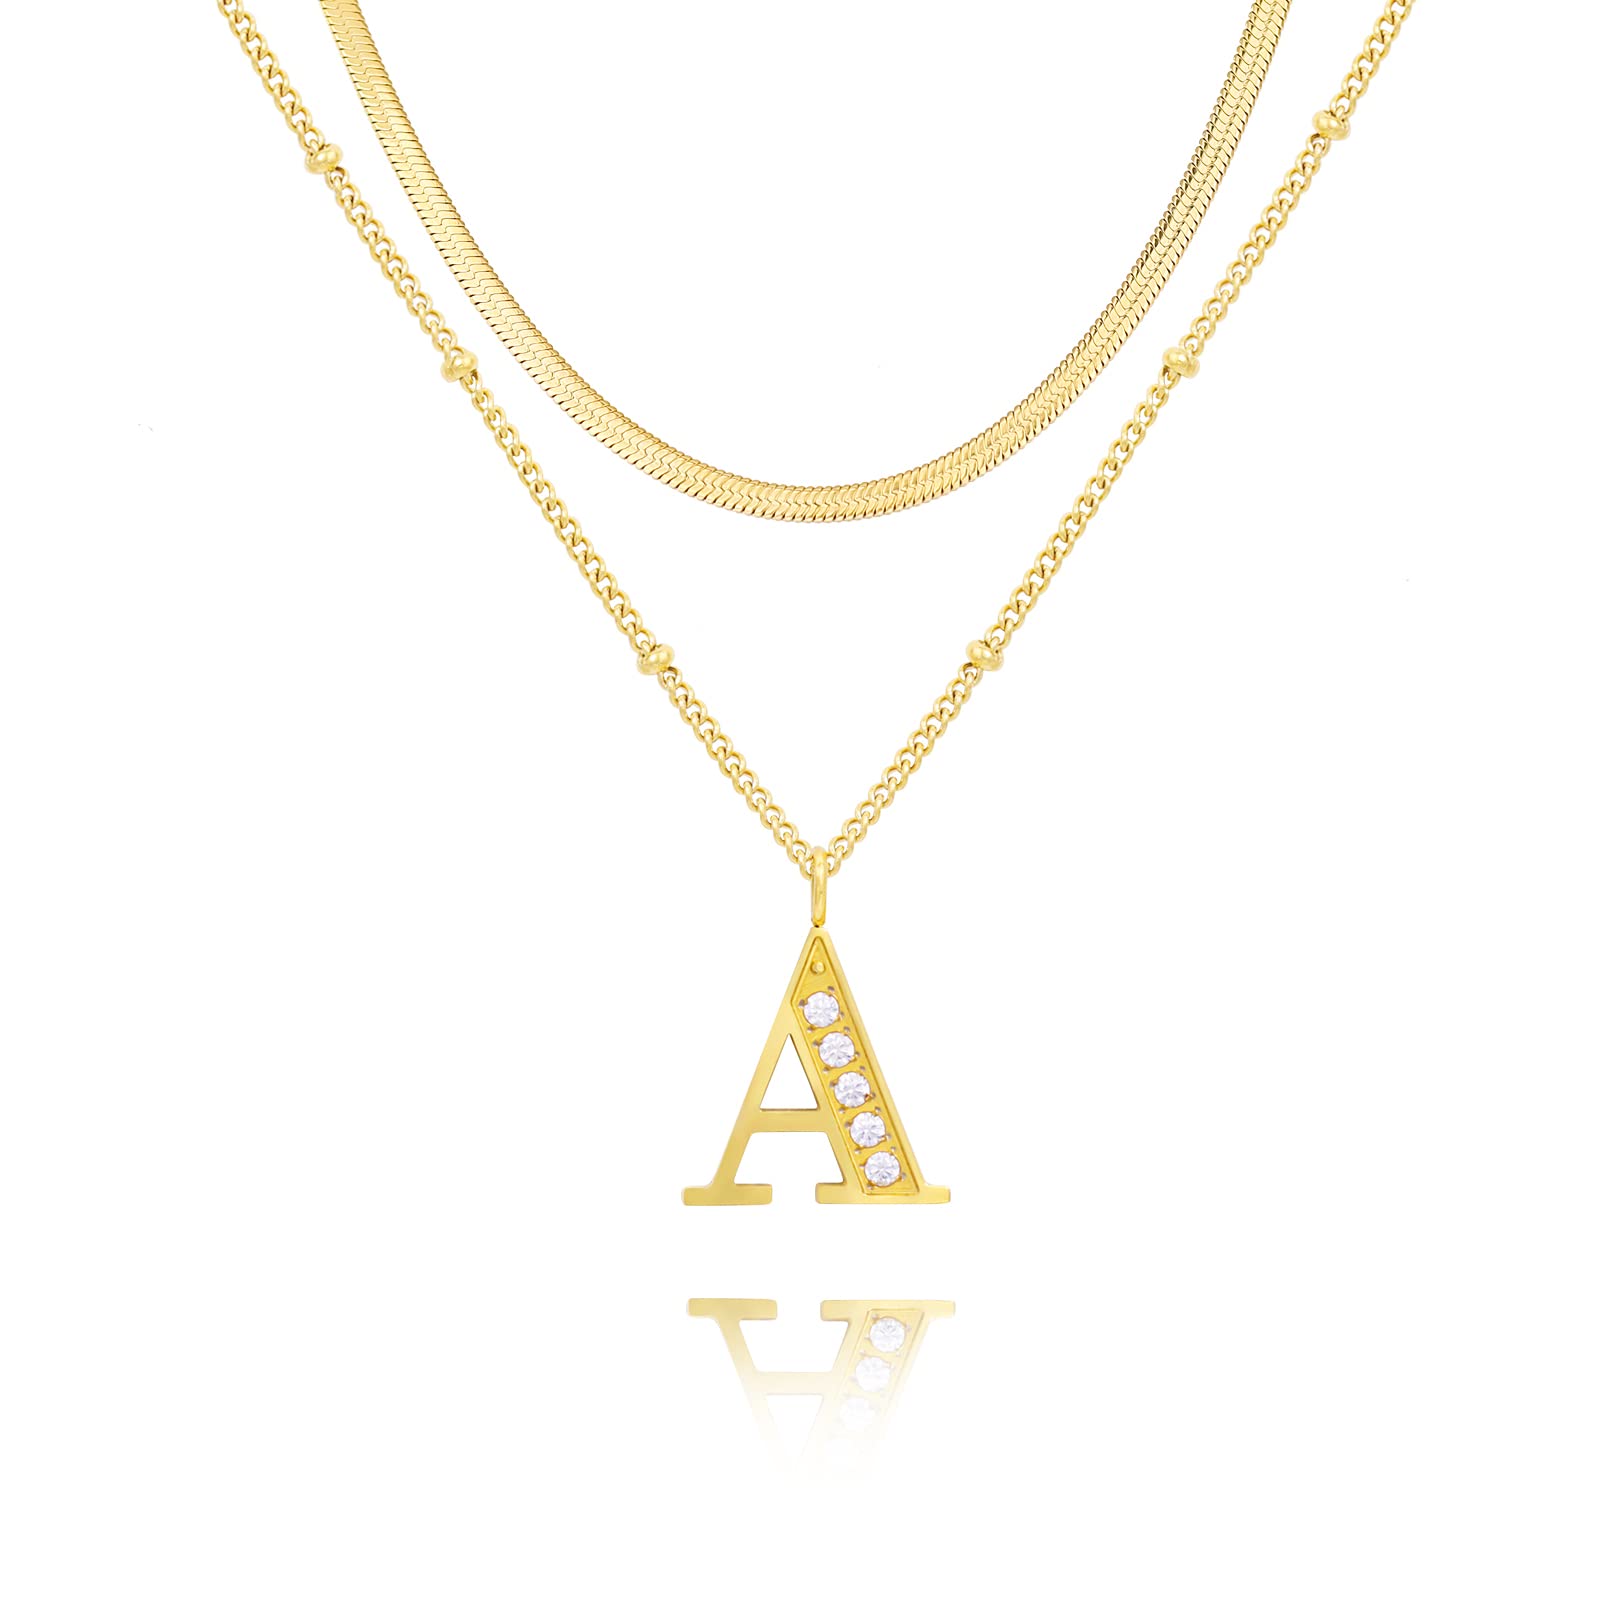  KDIZI Gold Initial Necklaces for Women Girls,Dainty